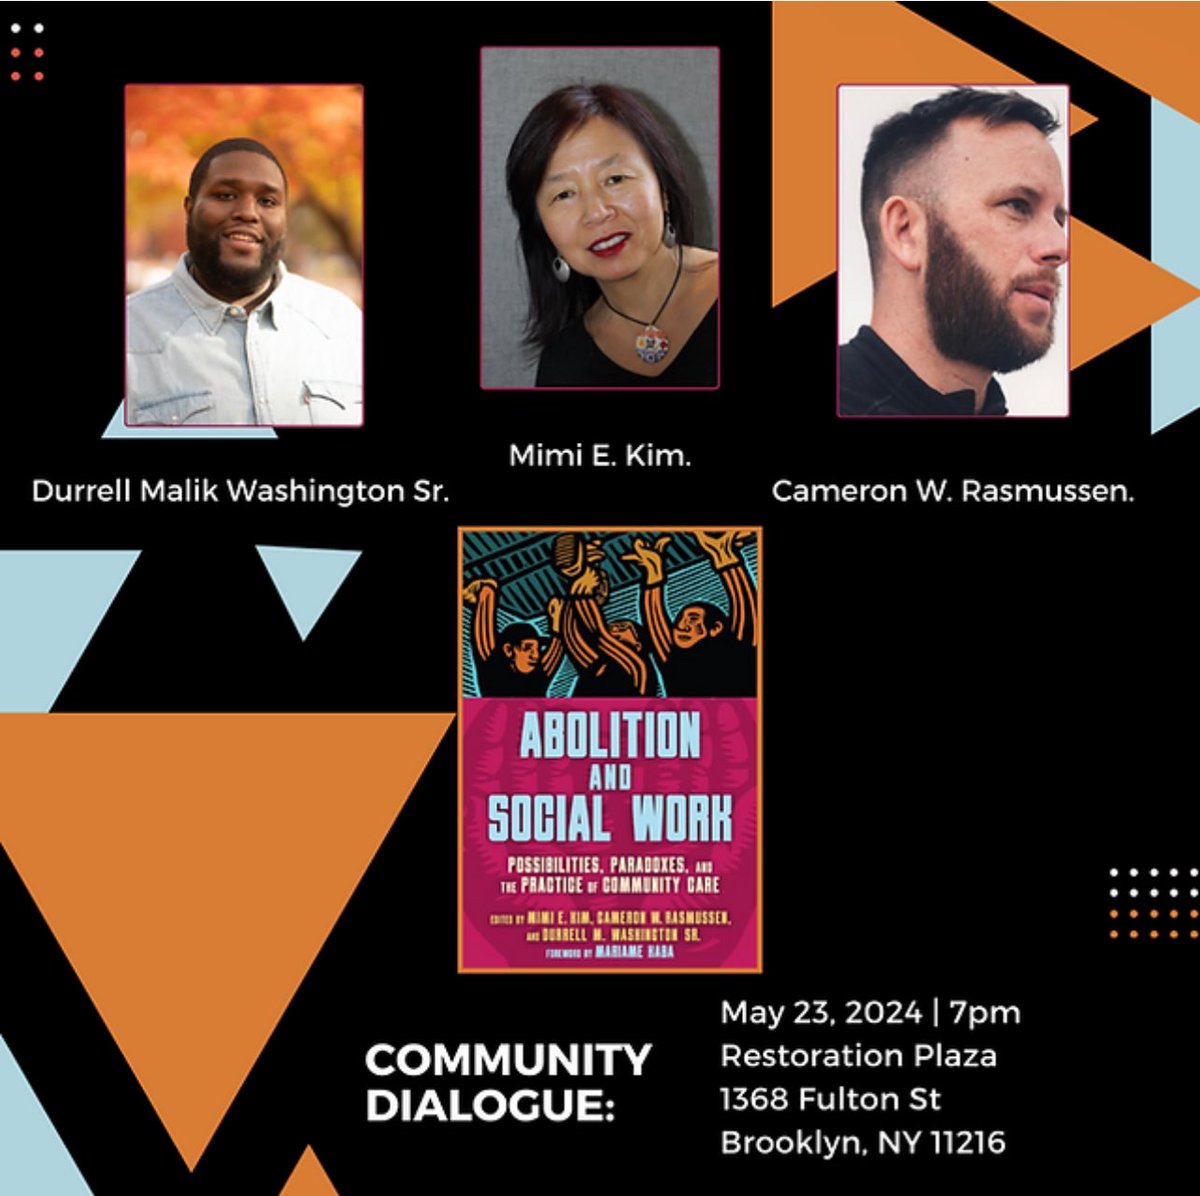 Thursday 5/23 in Brooklyn - Mimi Kim, @builtfoesuccess and myself talking about the new book Abolition and Social Work, organized by @cafeconlibrosbk Register here: cafeconlibrosbk.com/event-info/abo…